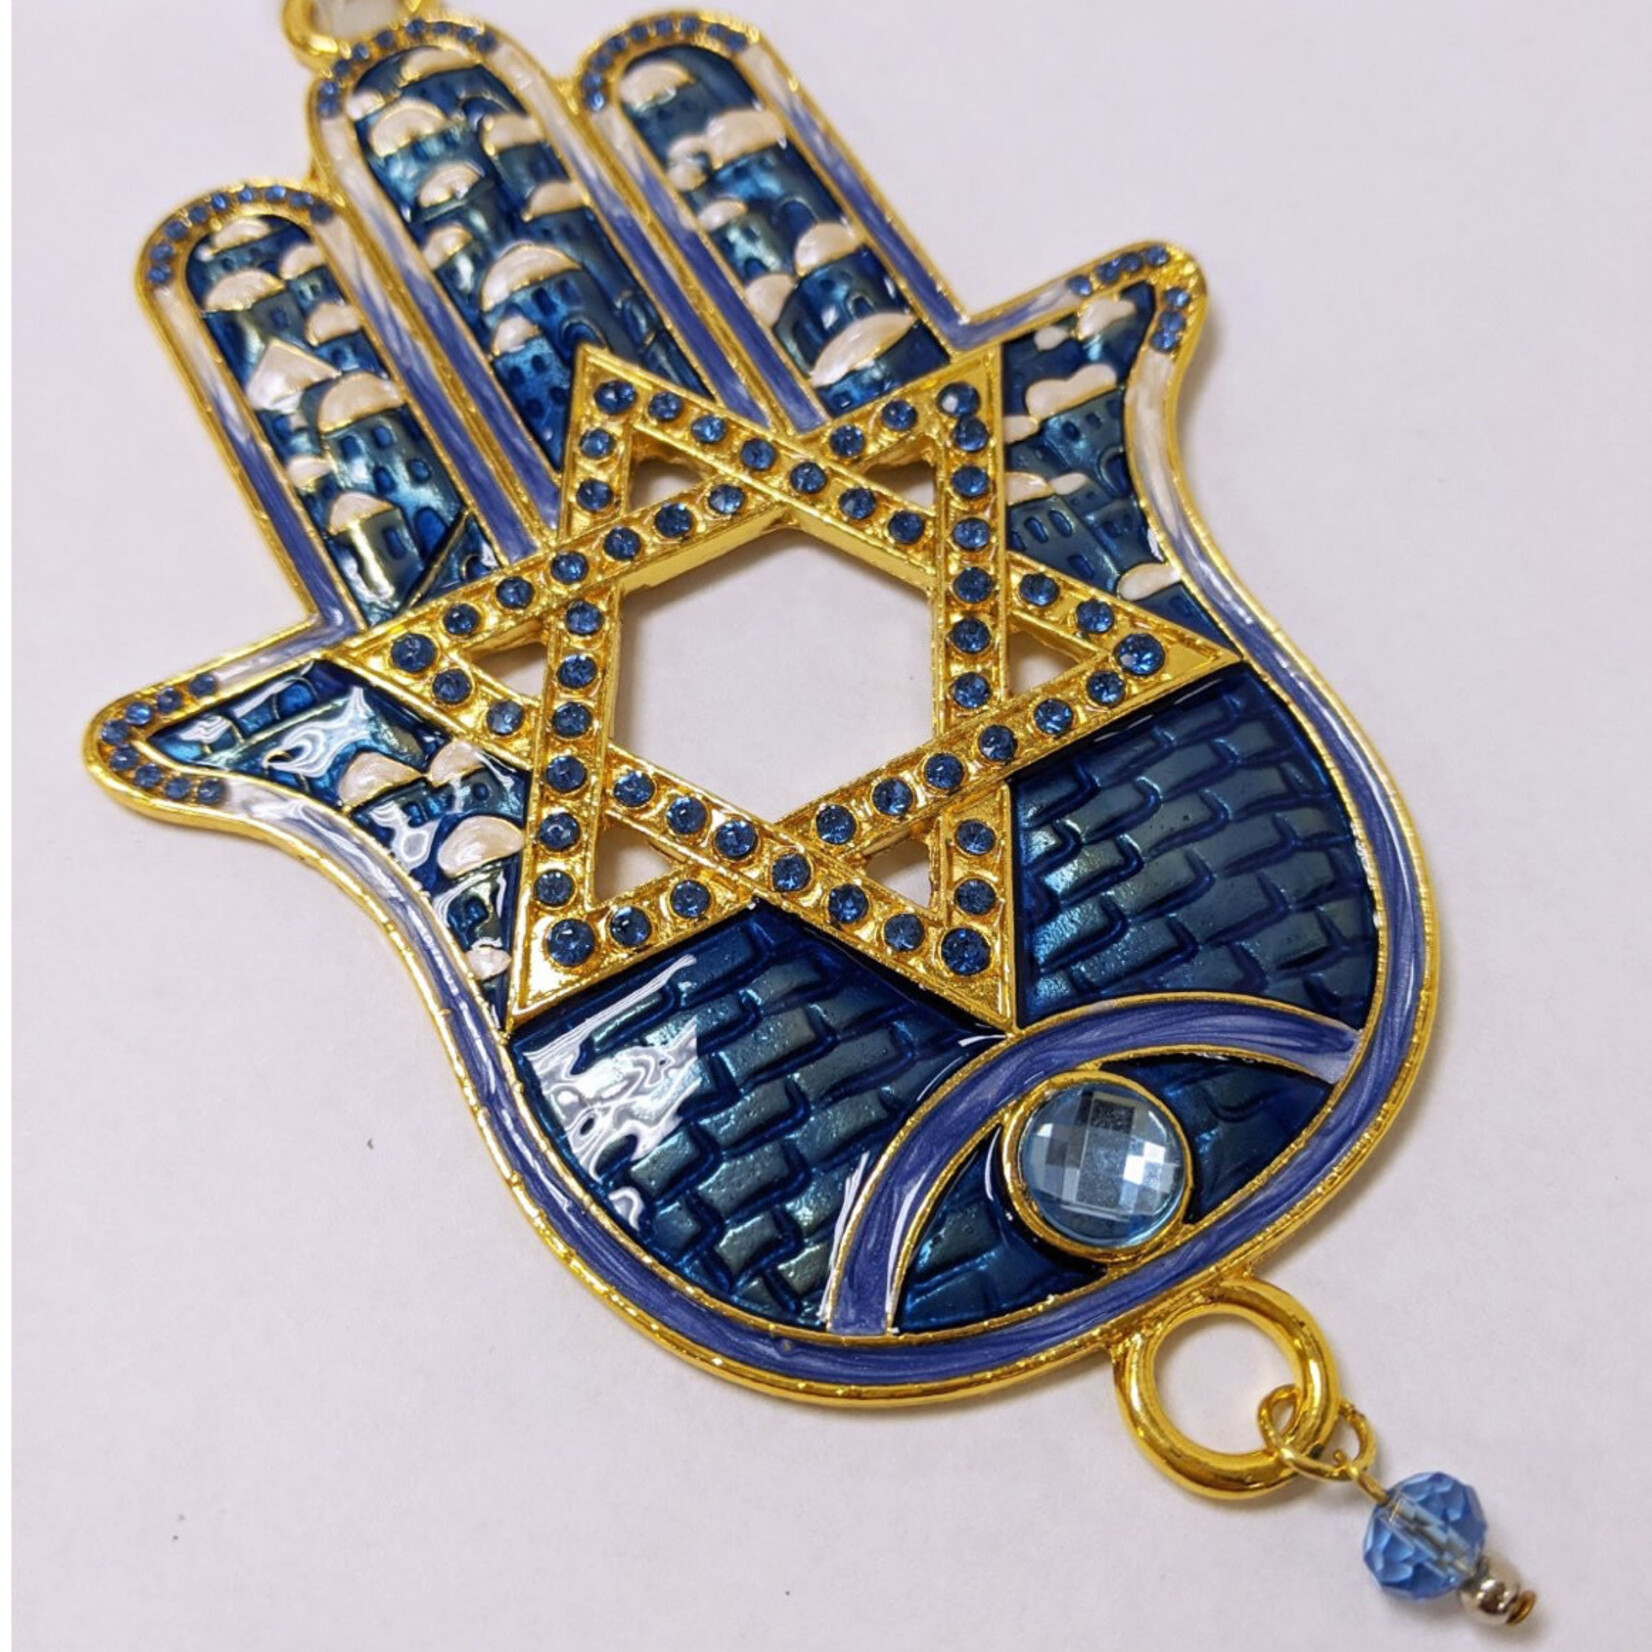 Blue Ornament Hamsa and Star of David Hand Painted Enamel with Crystals